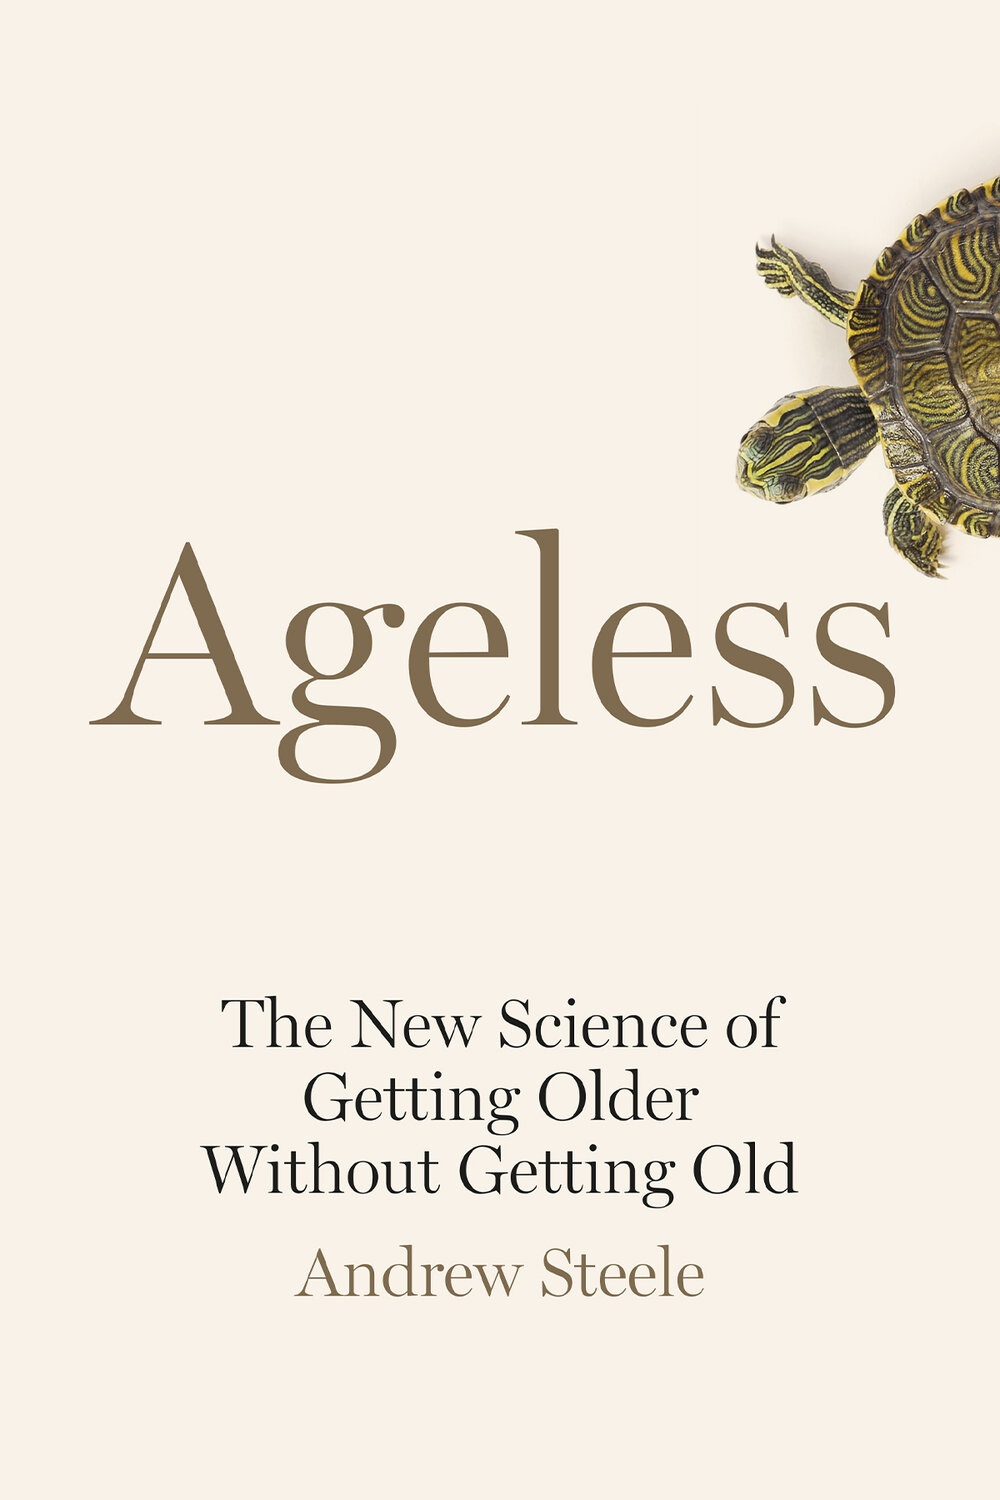 Ageless: The New Science of Getting Older Without Getting Old by Andrew Steele